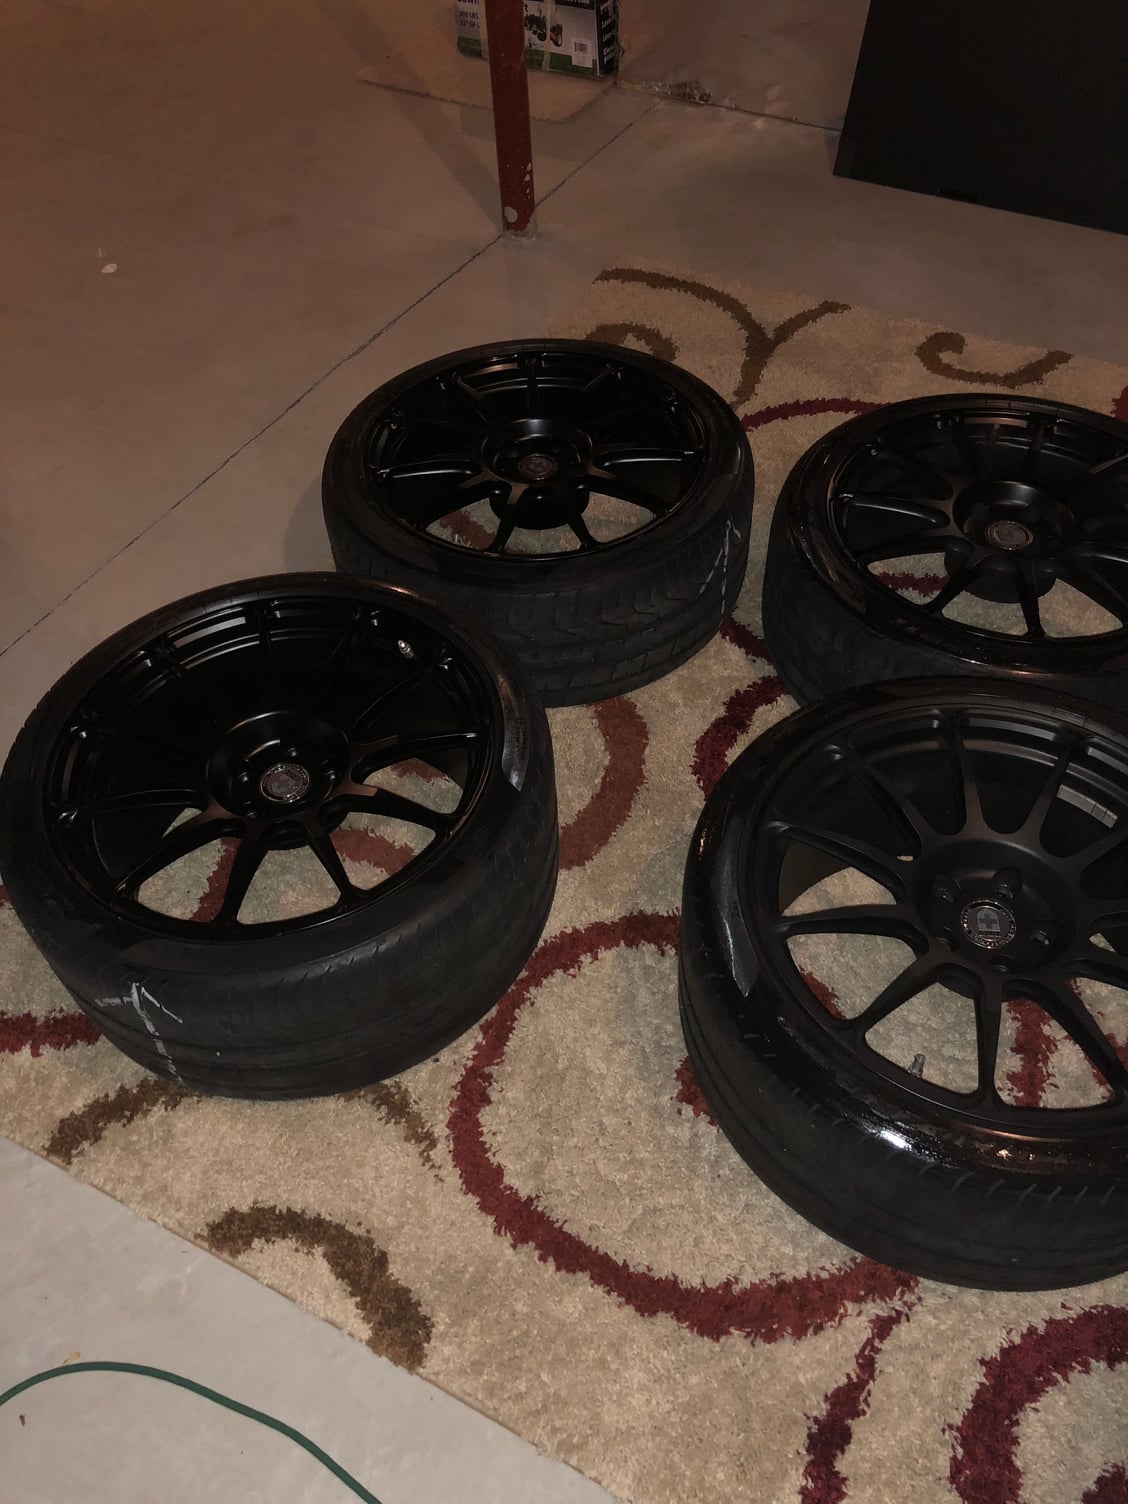 Wheels and Tires/Axles - 19" HRE P43s (cheapest online, will match if similar wheels for lower price ) - Used - 2010 to 2016 Mercedes-Benz E63 AMG S - Clifton Park, NY 12065, United States